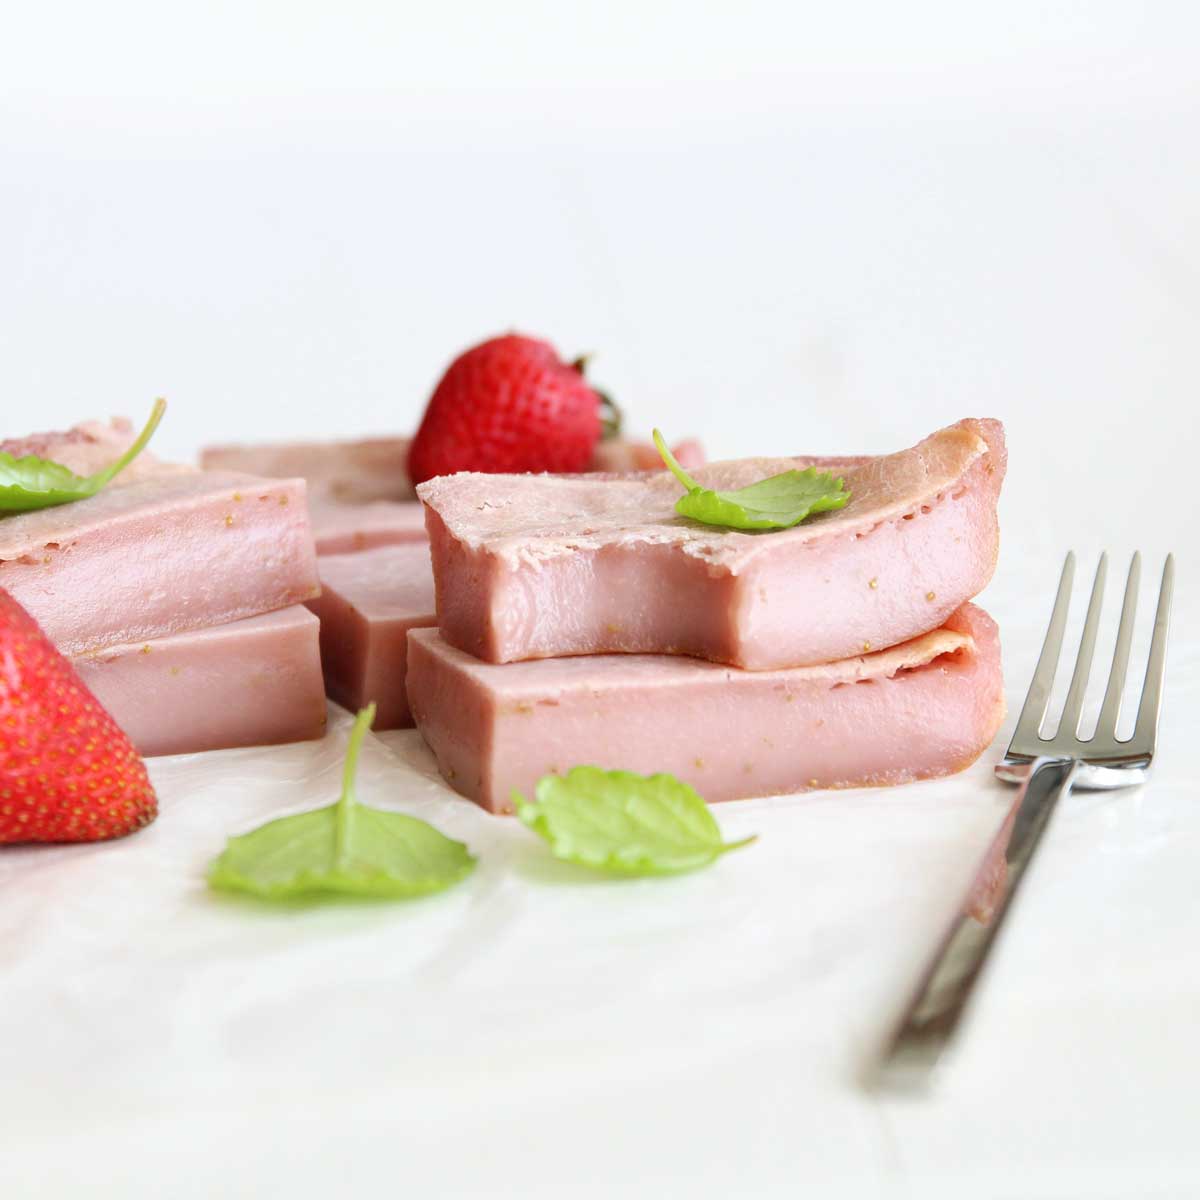 Deliciously Soft & Chewy Baked Strawberry Mochi Cake (Nian Gao) - Vegan Chocolate Whipped Cream